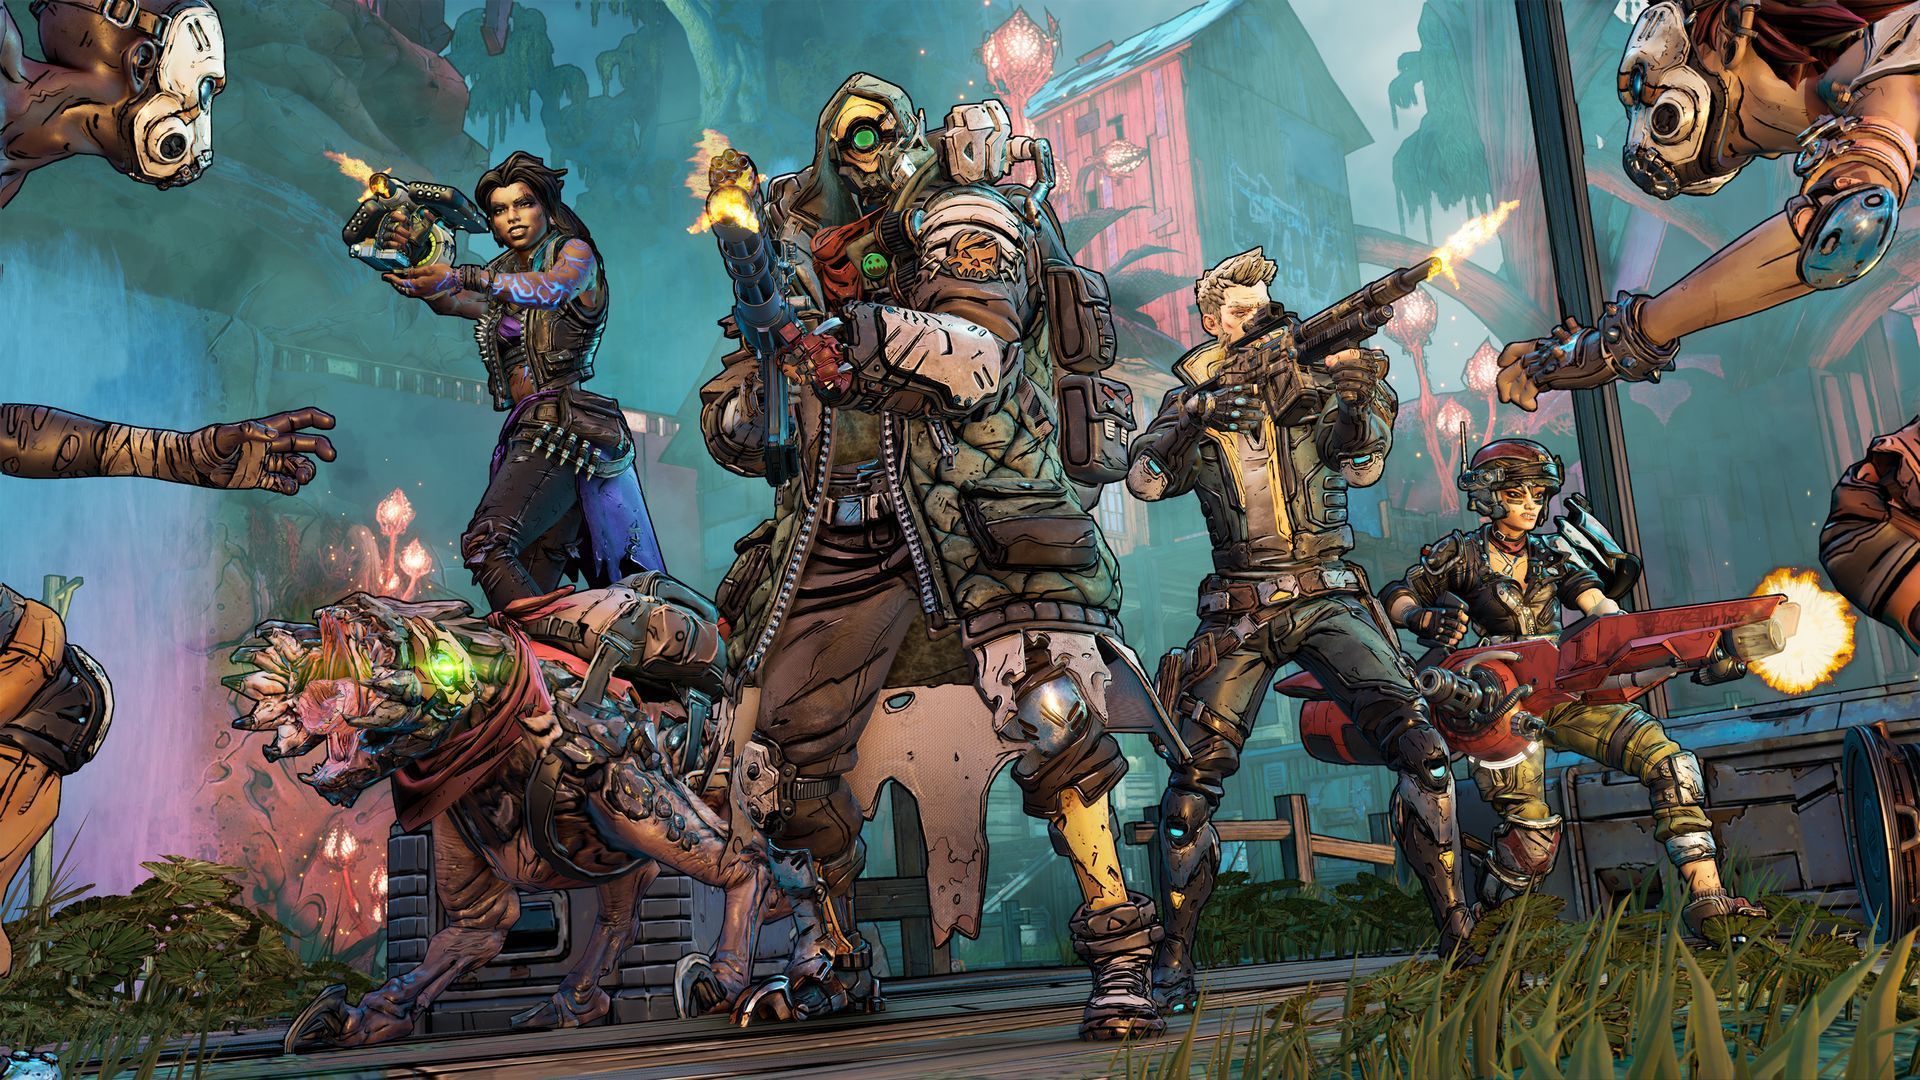 10 essential Borderlands 3 tips to know before you play